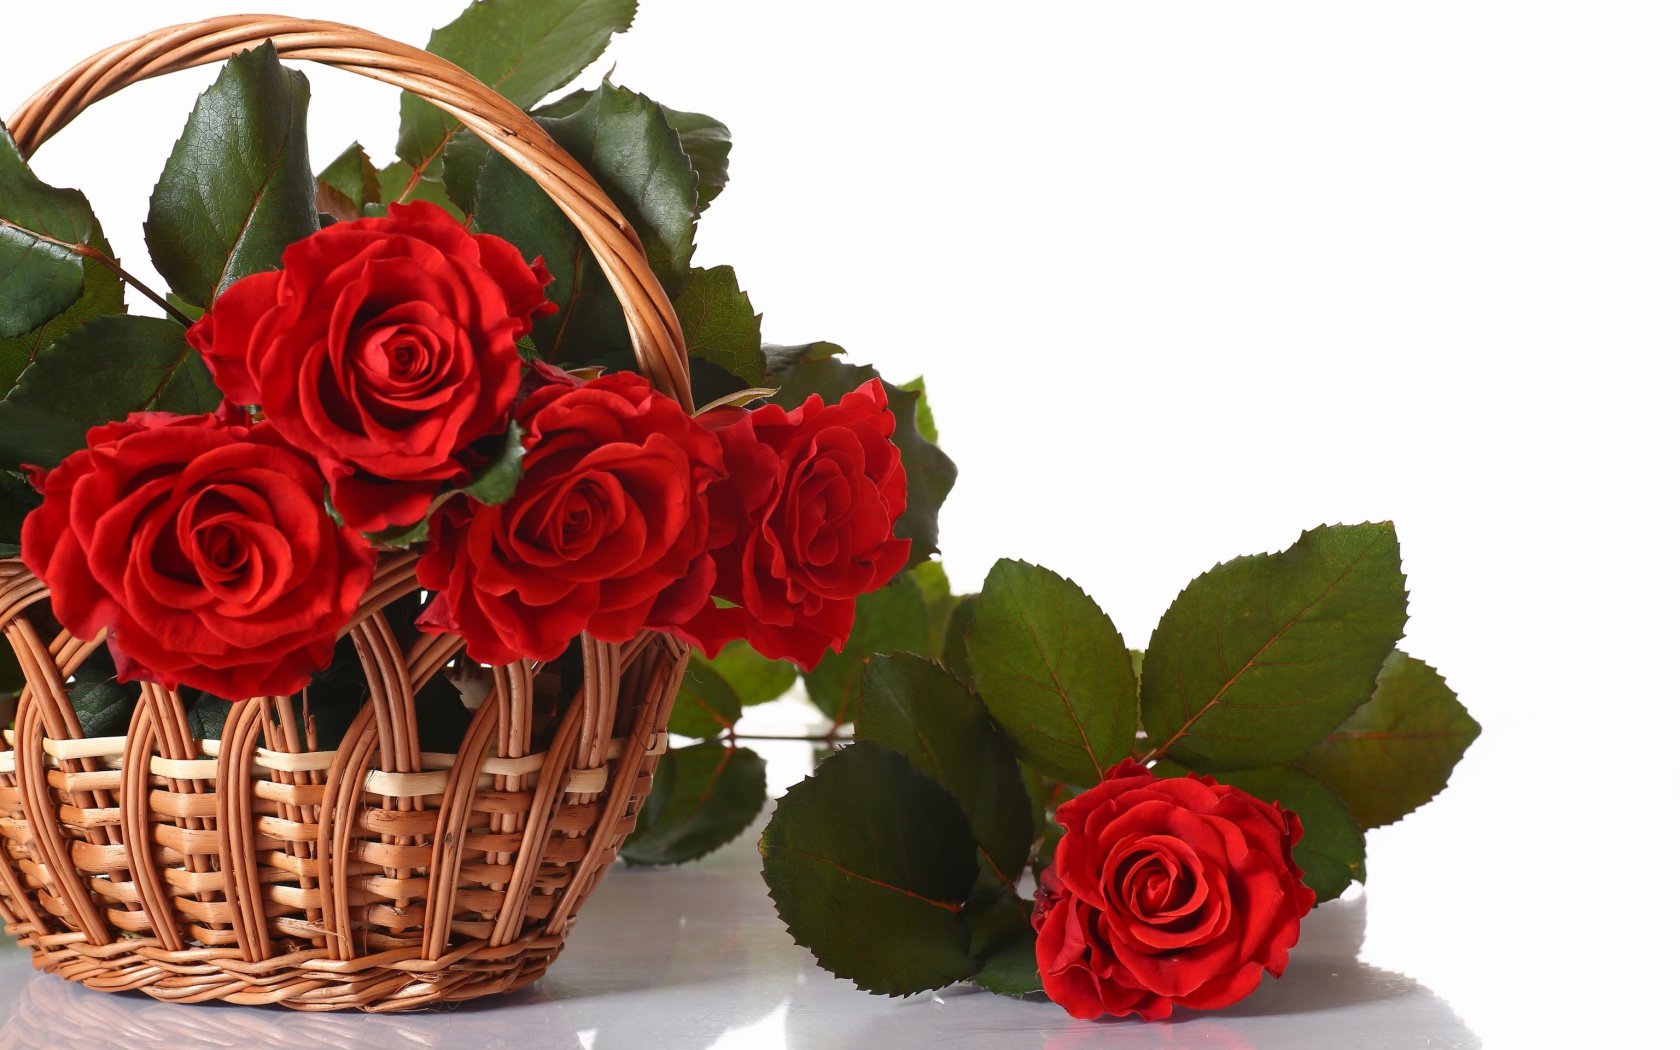 Das Basket with Roses Wallpaper 1680x1050